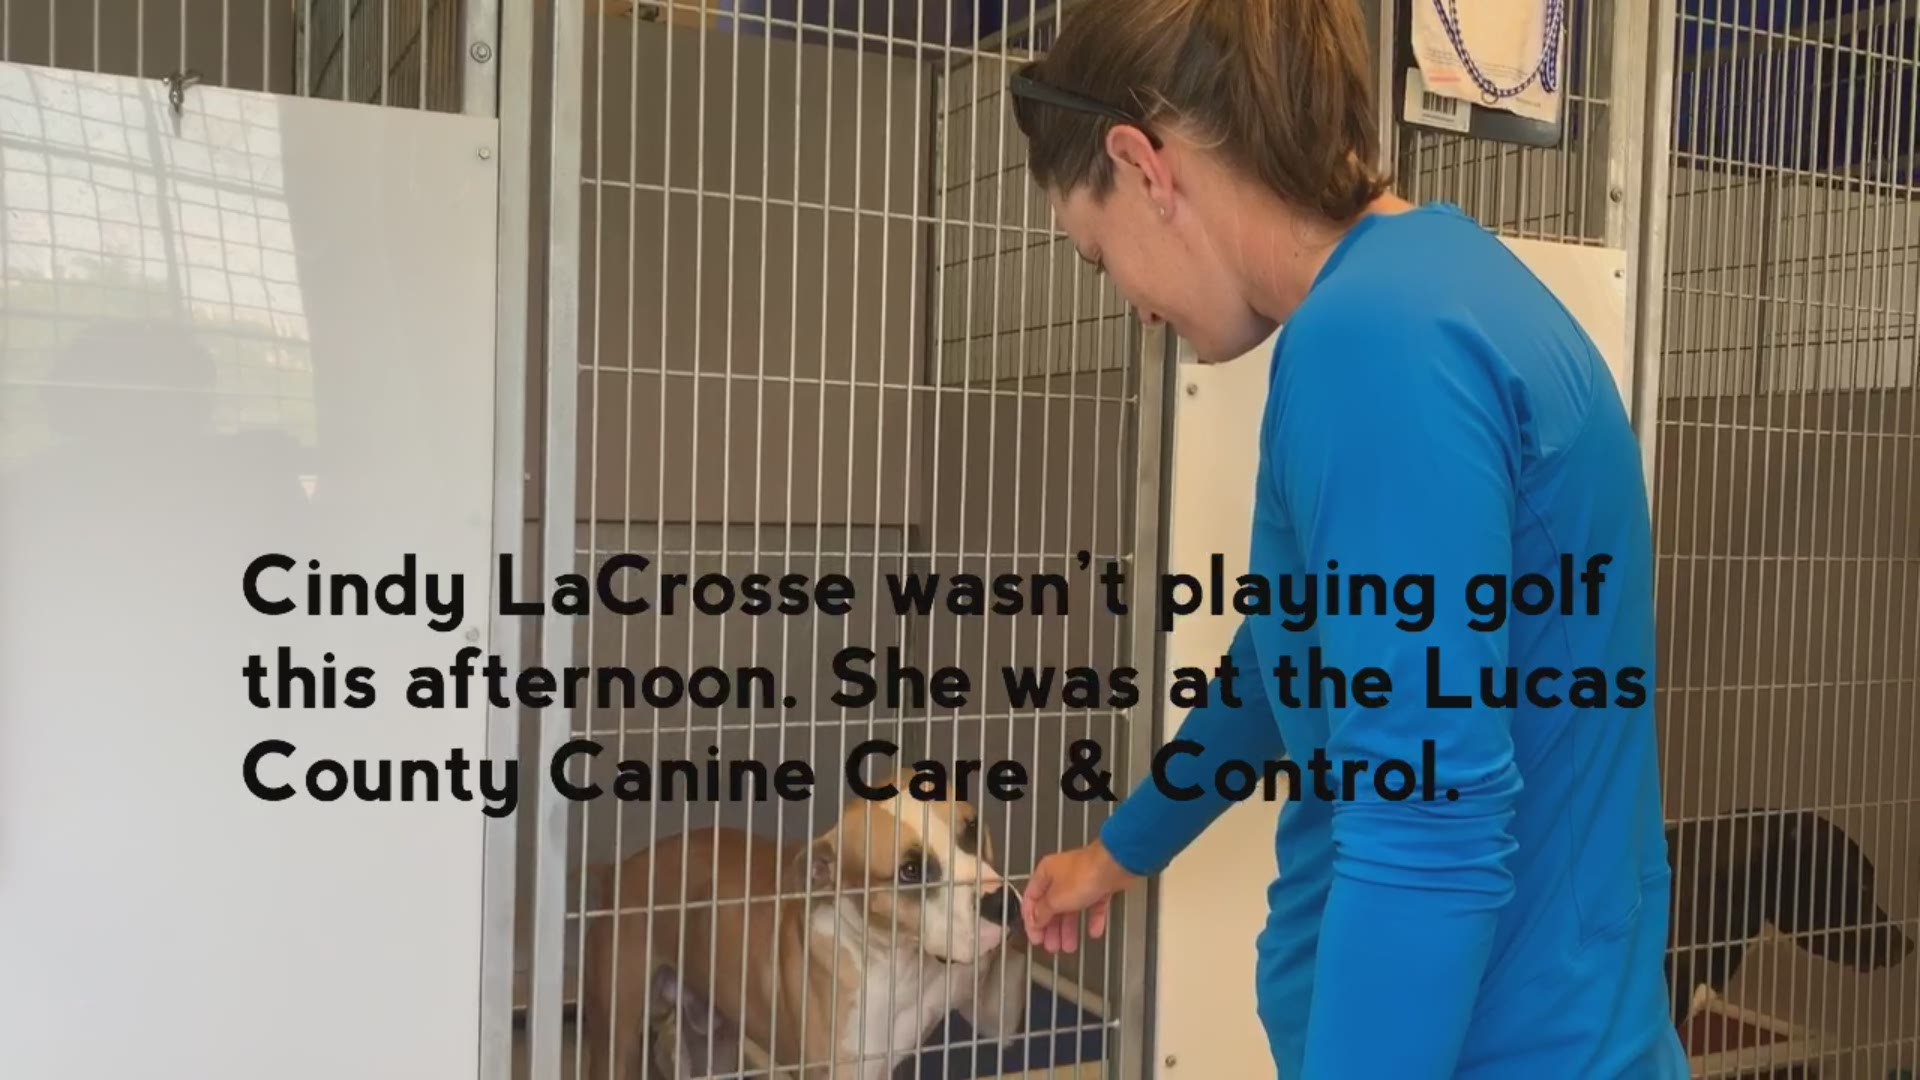 The golf pro usually goes to local shelters when she is on tour.